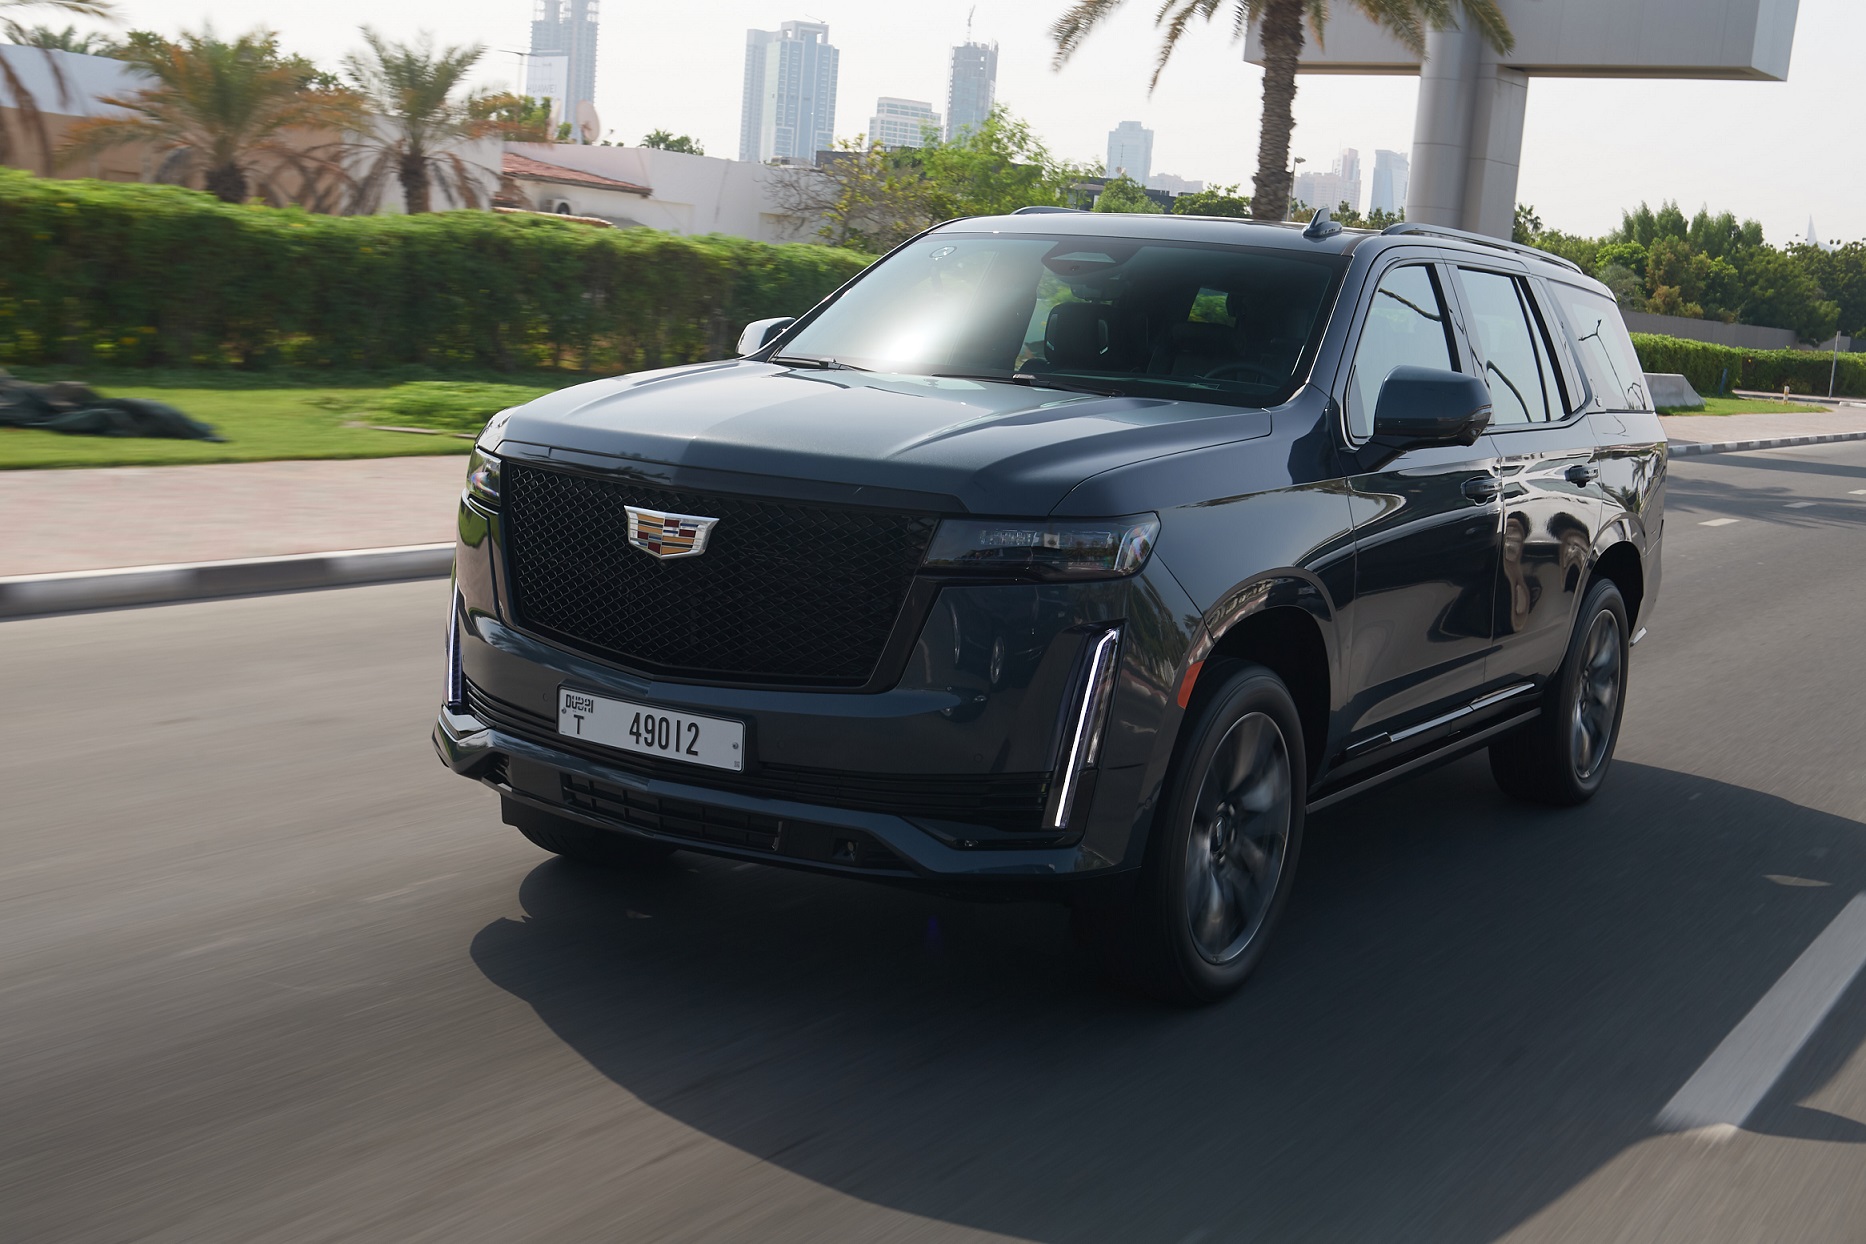 2021 Cadillac Escalade Five Technology Features that Redefine Luxury SUVs